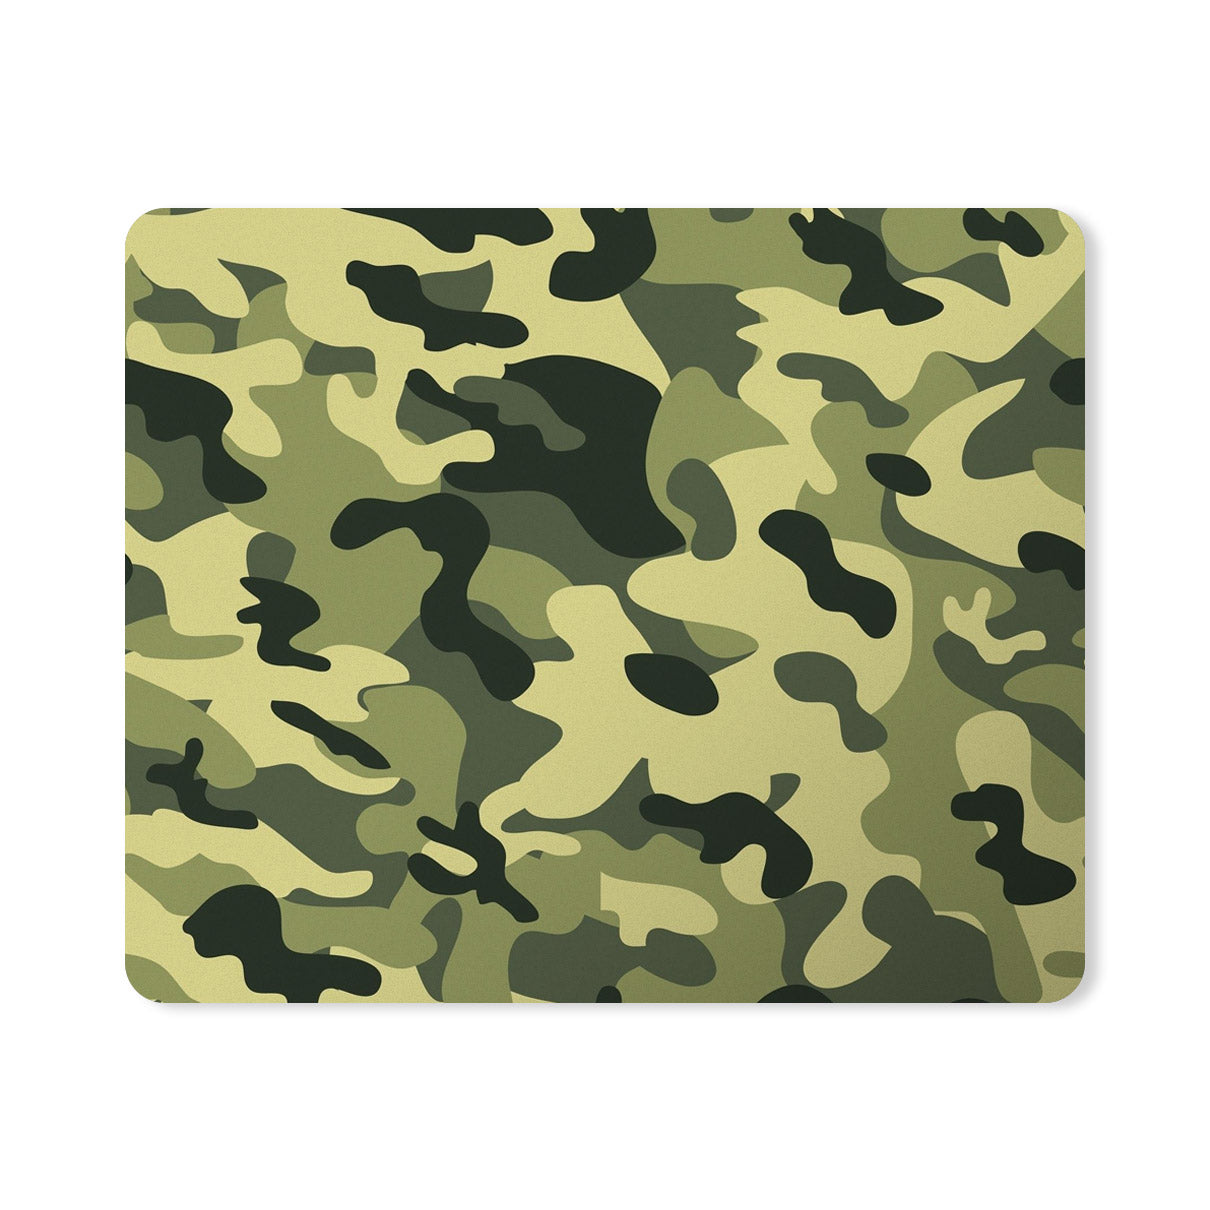 Camouflage Army Green Designer Printed Premium Mouse pad (9 in x 7.5 in)